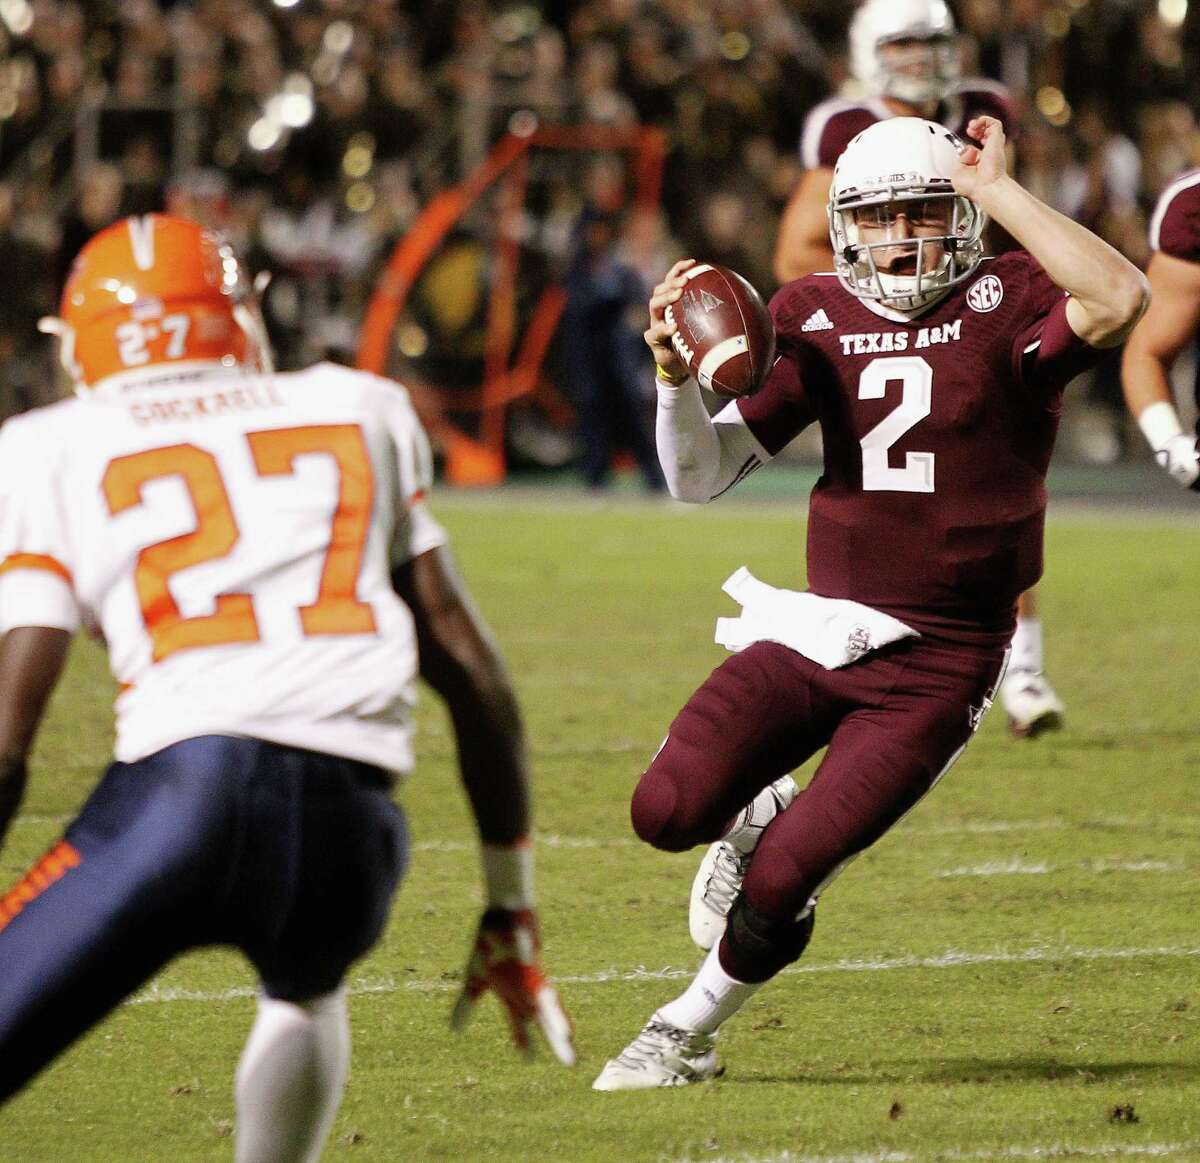 COLLEGE STATION, TX - NOVEMBER 02: Johnny Manziel #2 of the Texas A&M Aggies runs with the ball in the second quarter as defensive back Devin Cockrell #27 of the UTEP Miners looks to make a tackle at Kyle Field on November 2, 2013 in College Station, Texas.